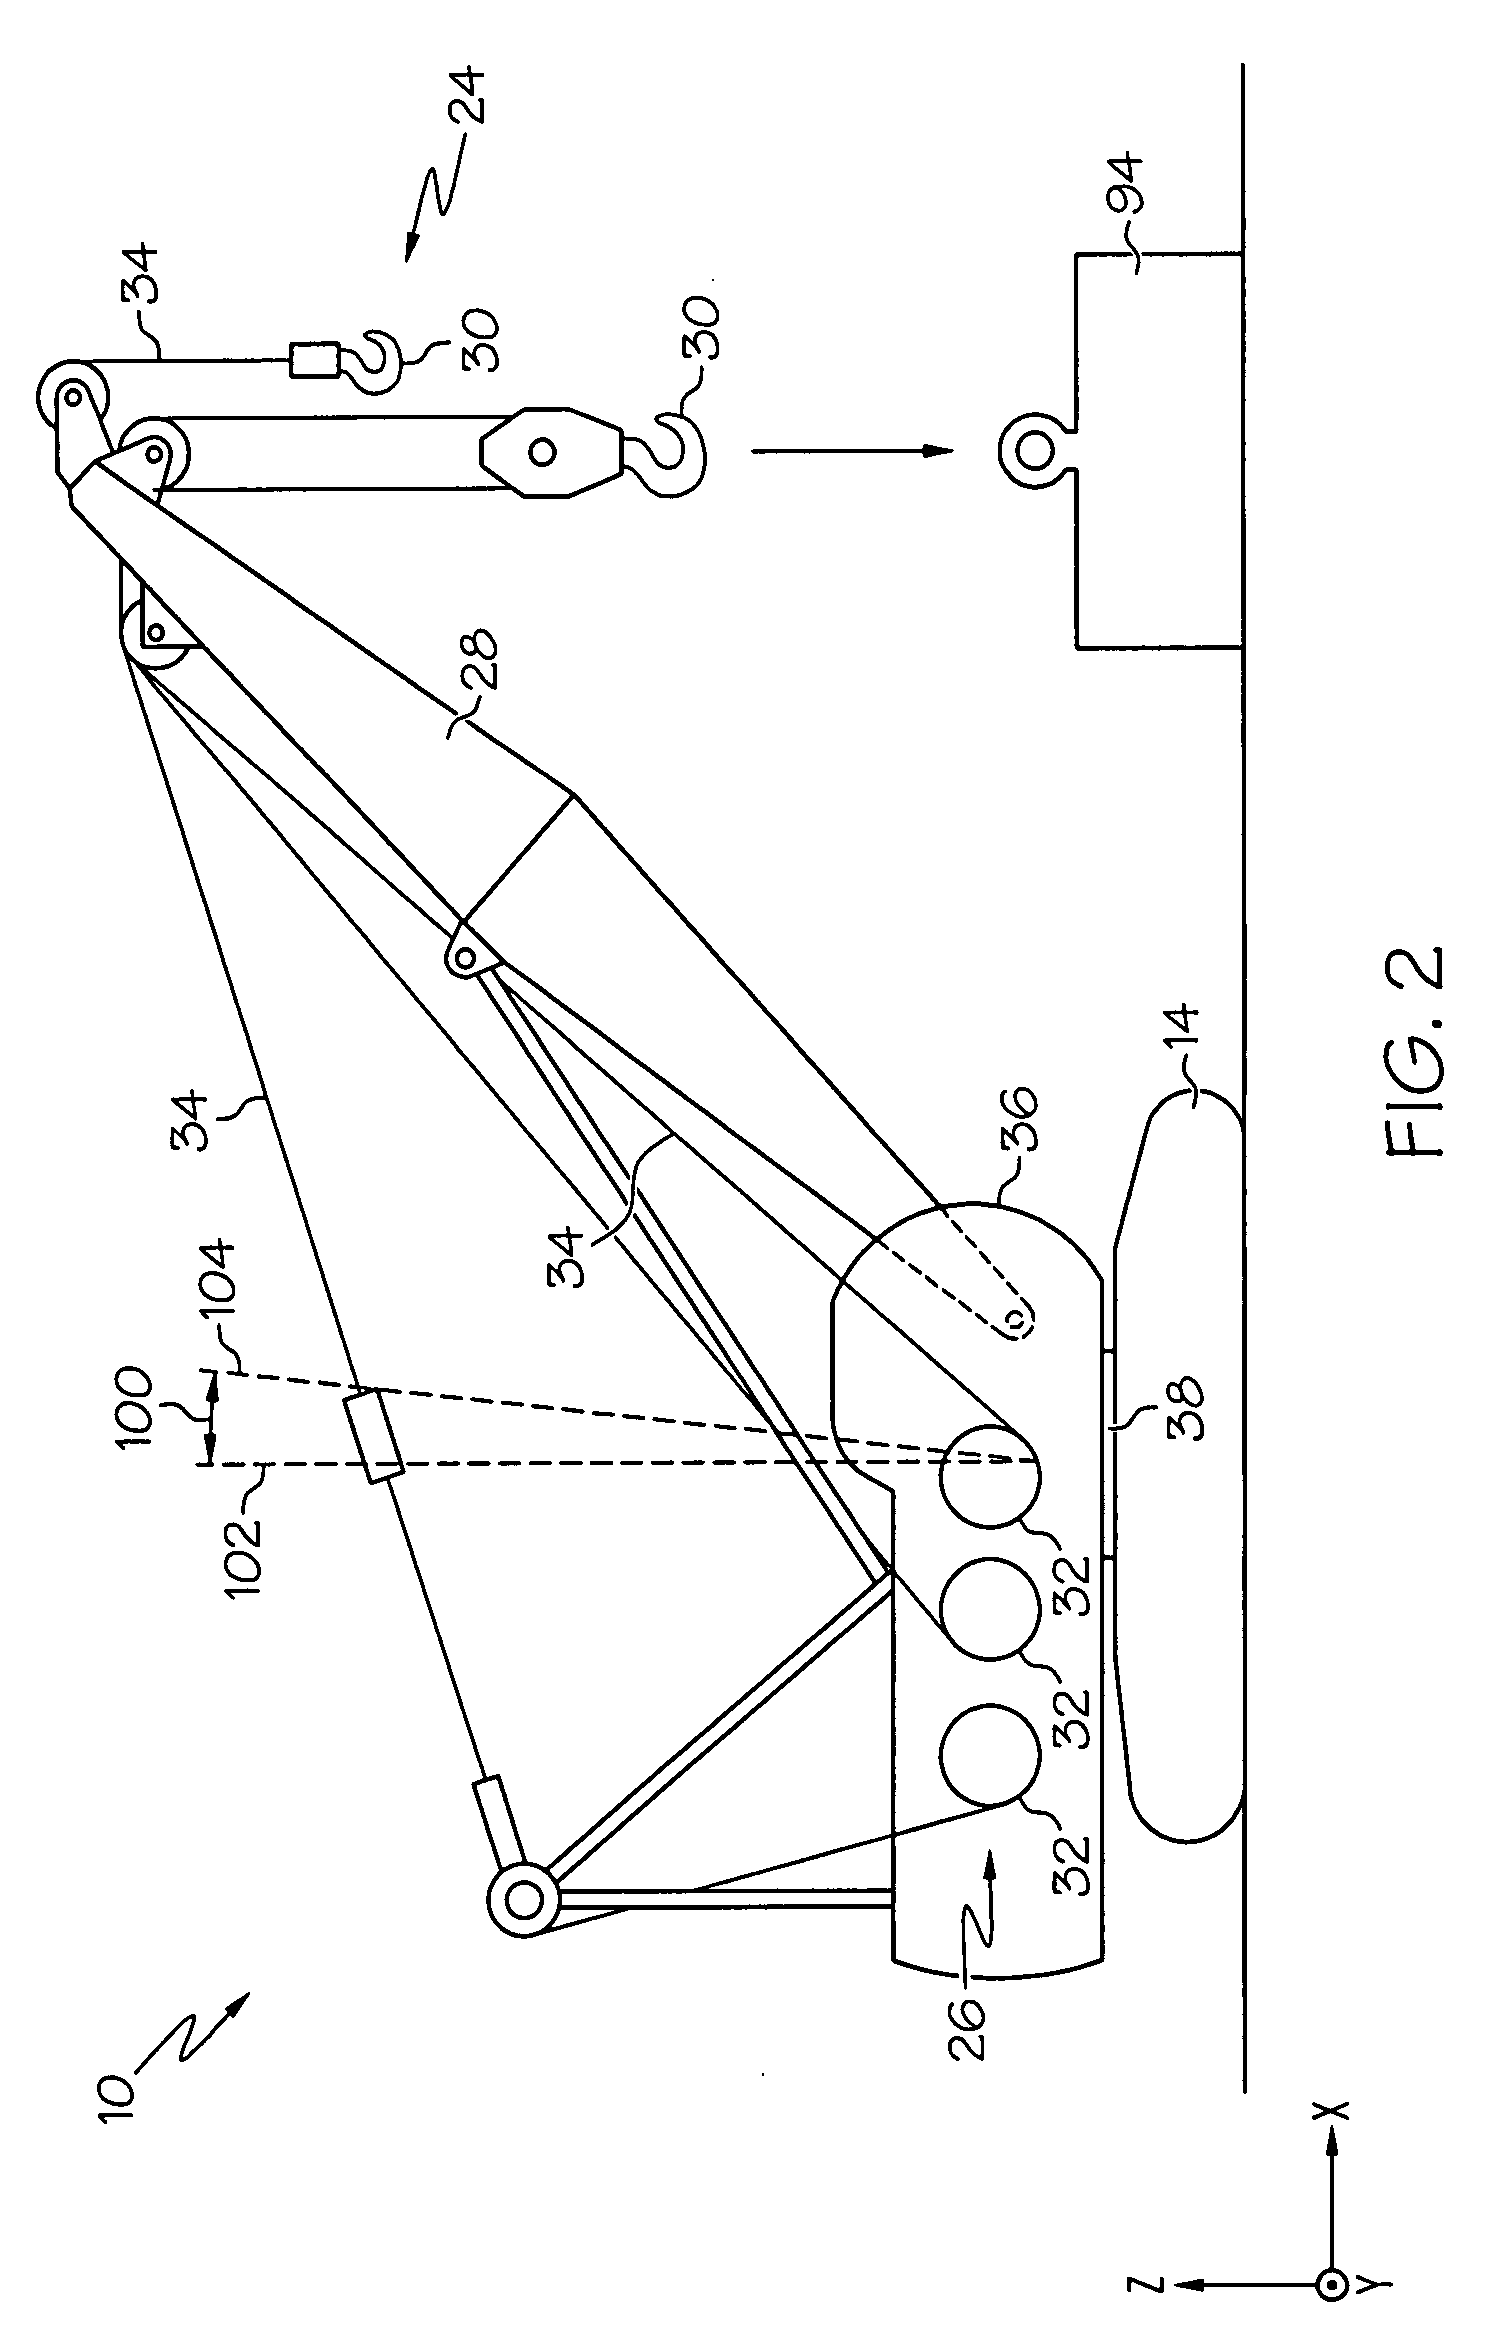 Apparatus and method for monitoring the stability of a construction machine